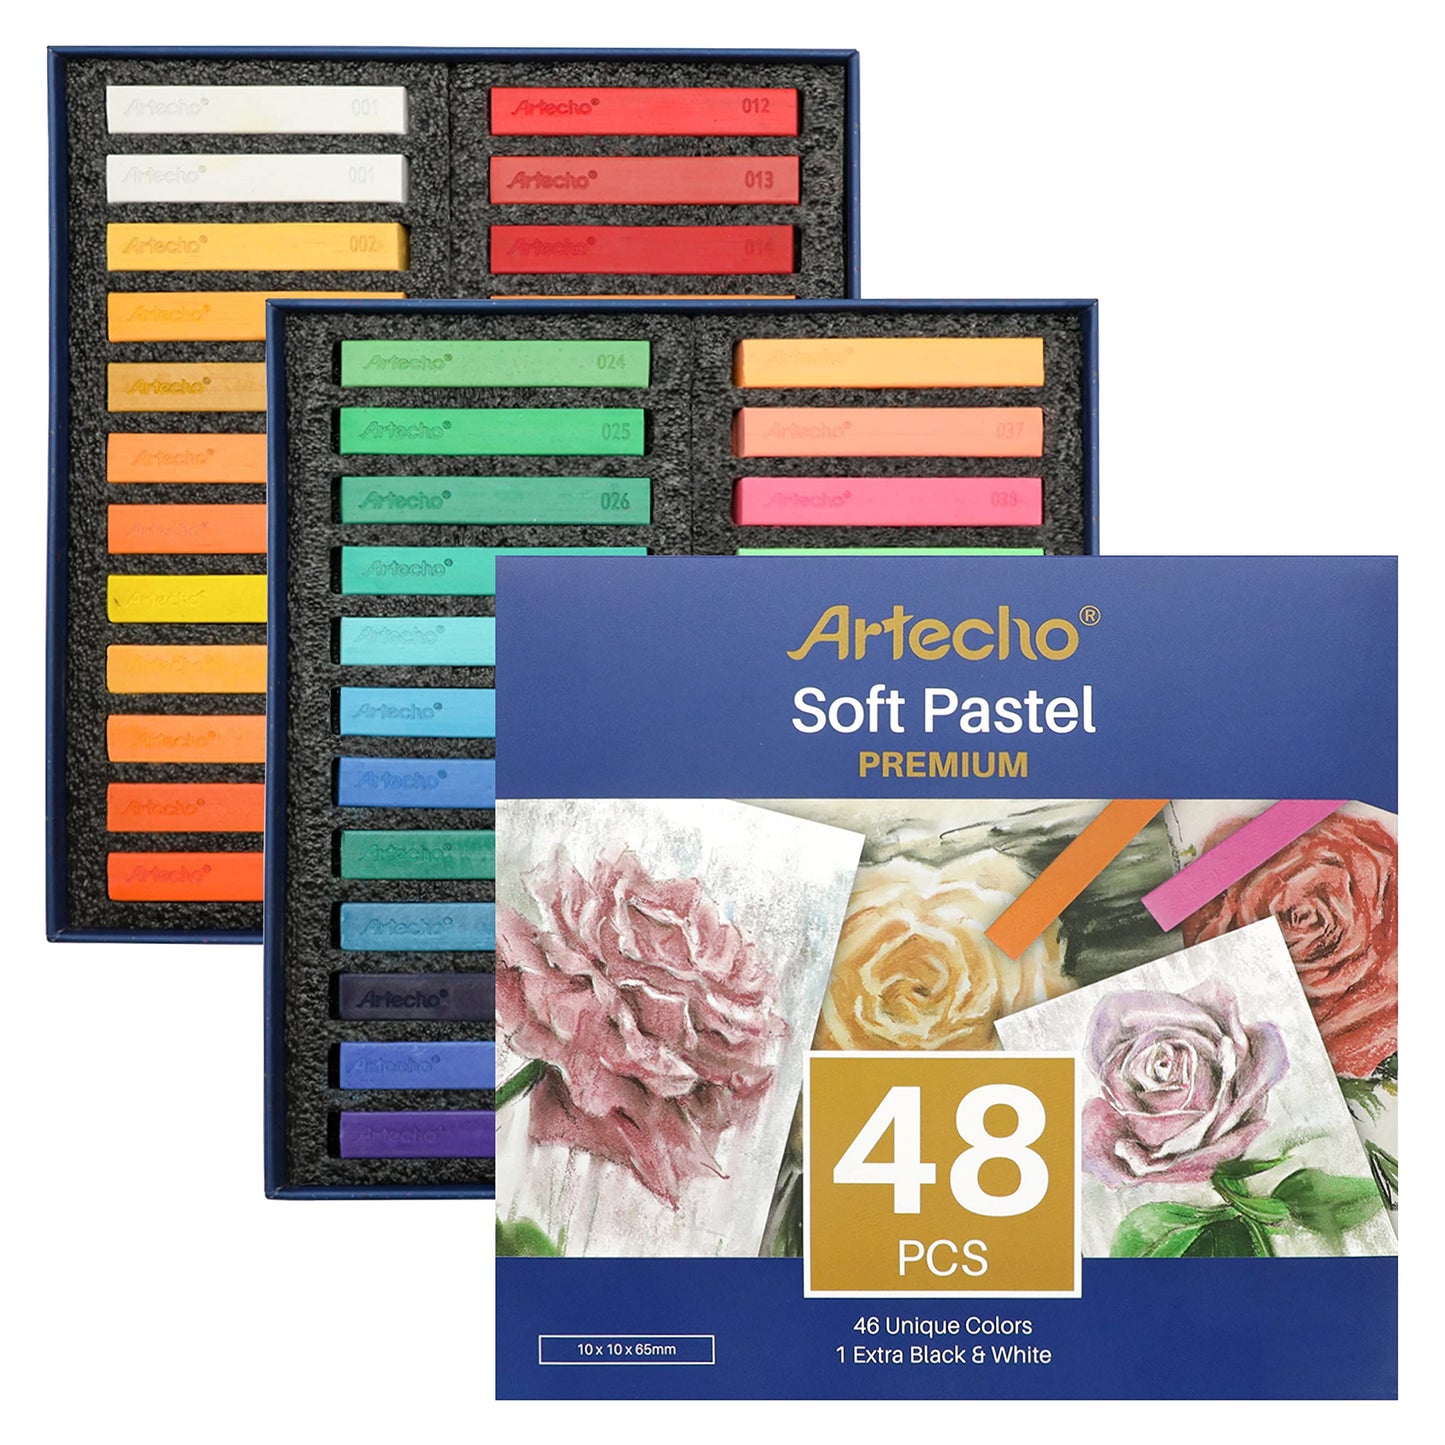 Artecho 48 Soft Pastels, 46 Colors Including 4 Fluorescent Colors, Extra Free Black & White, Square Chalk for Drawing, Blending, Layering, Shading,